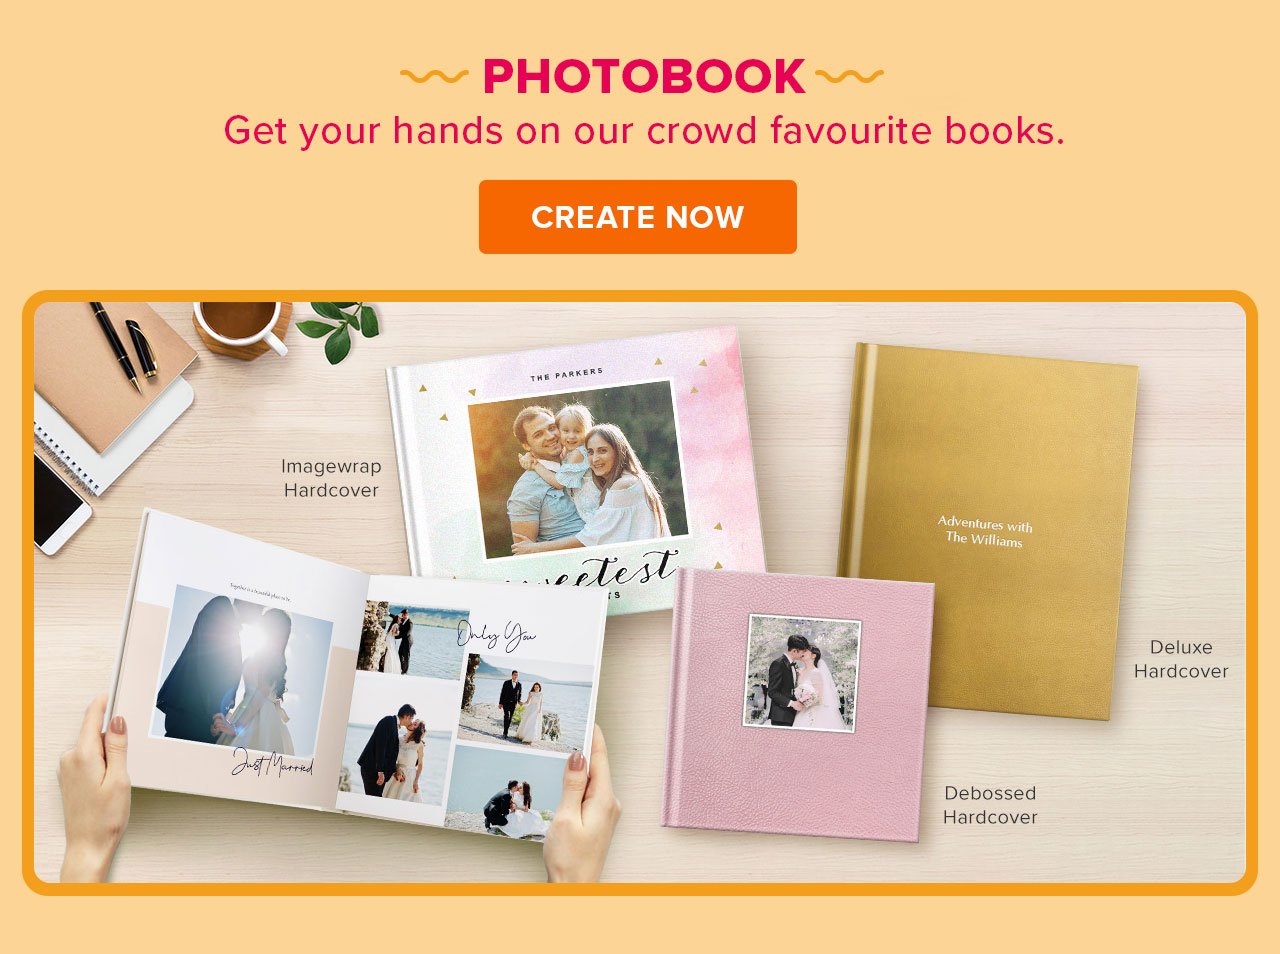  PHOTOBOOK Get your hands on our crowd favourite books. CREATE NOW Imagewrap Hardcover T L, Deluxe . Hardcover Debossed Hardcover 